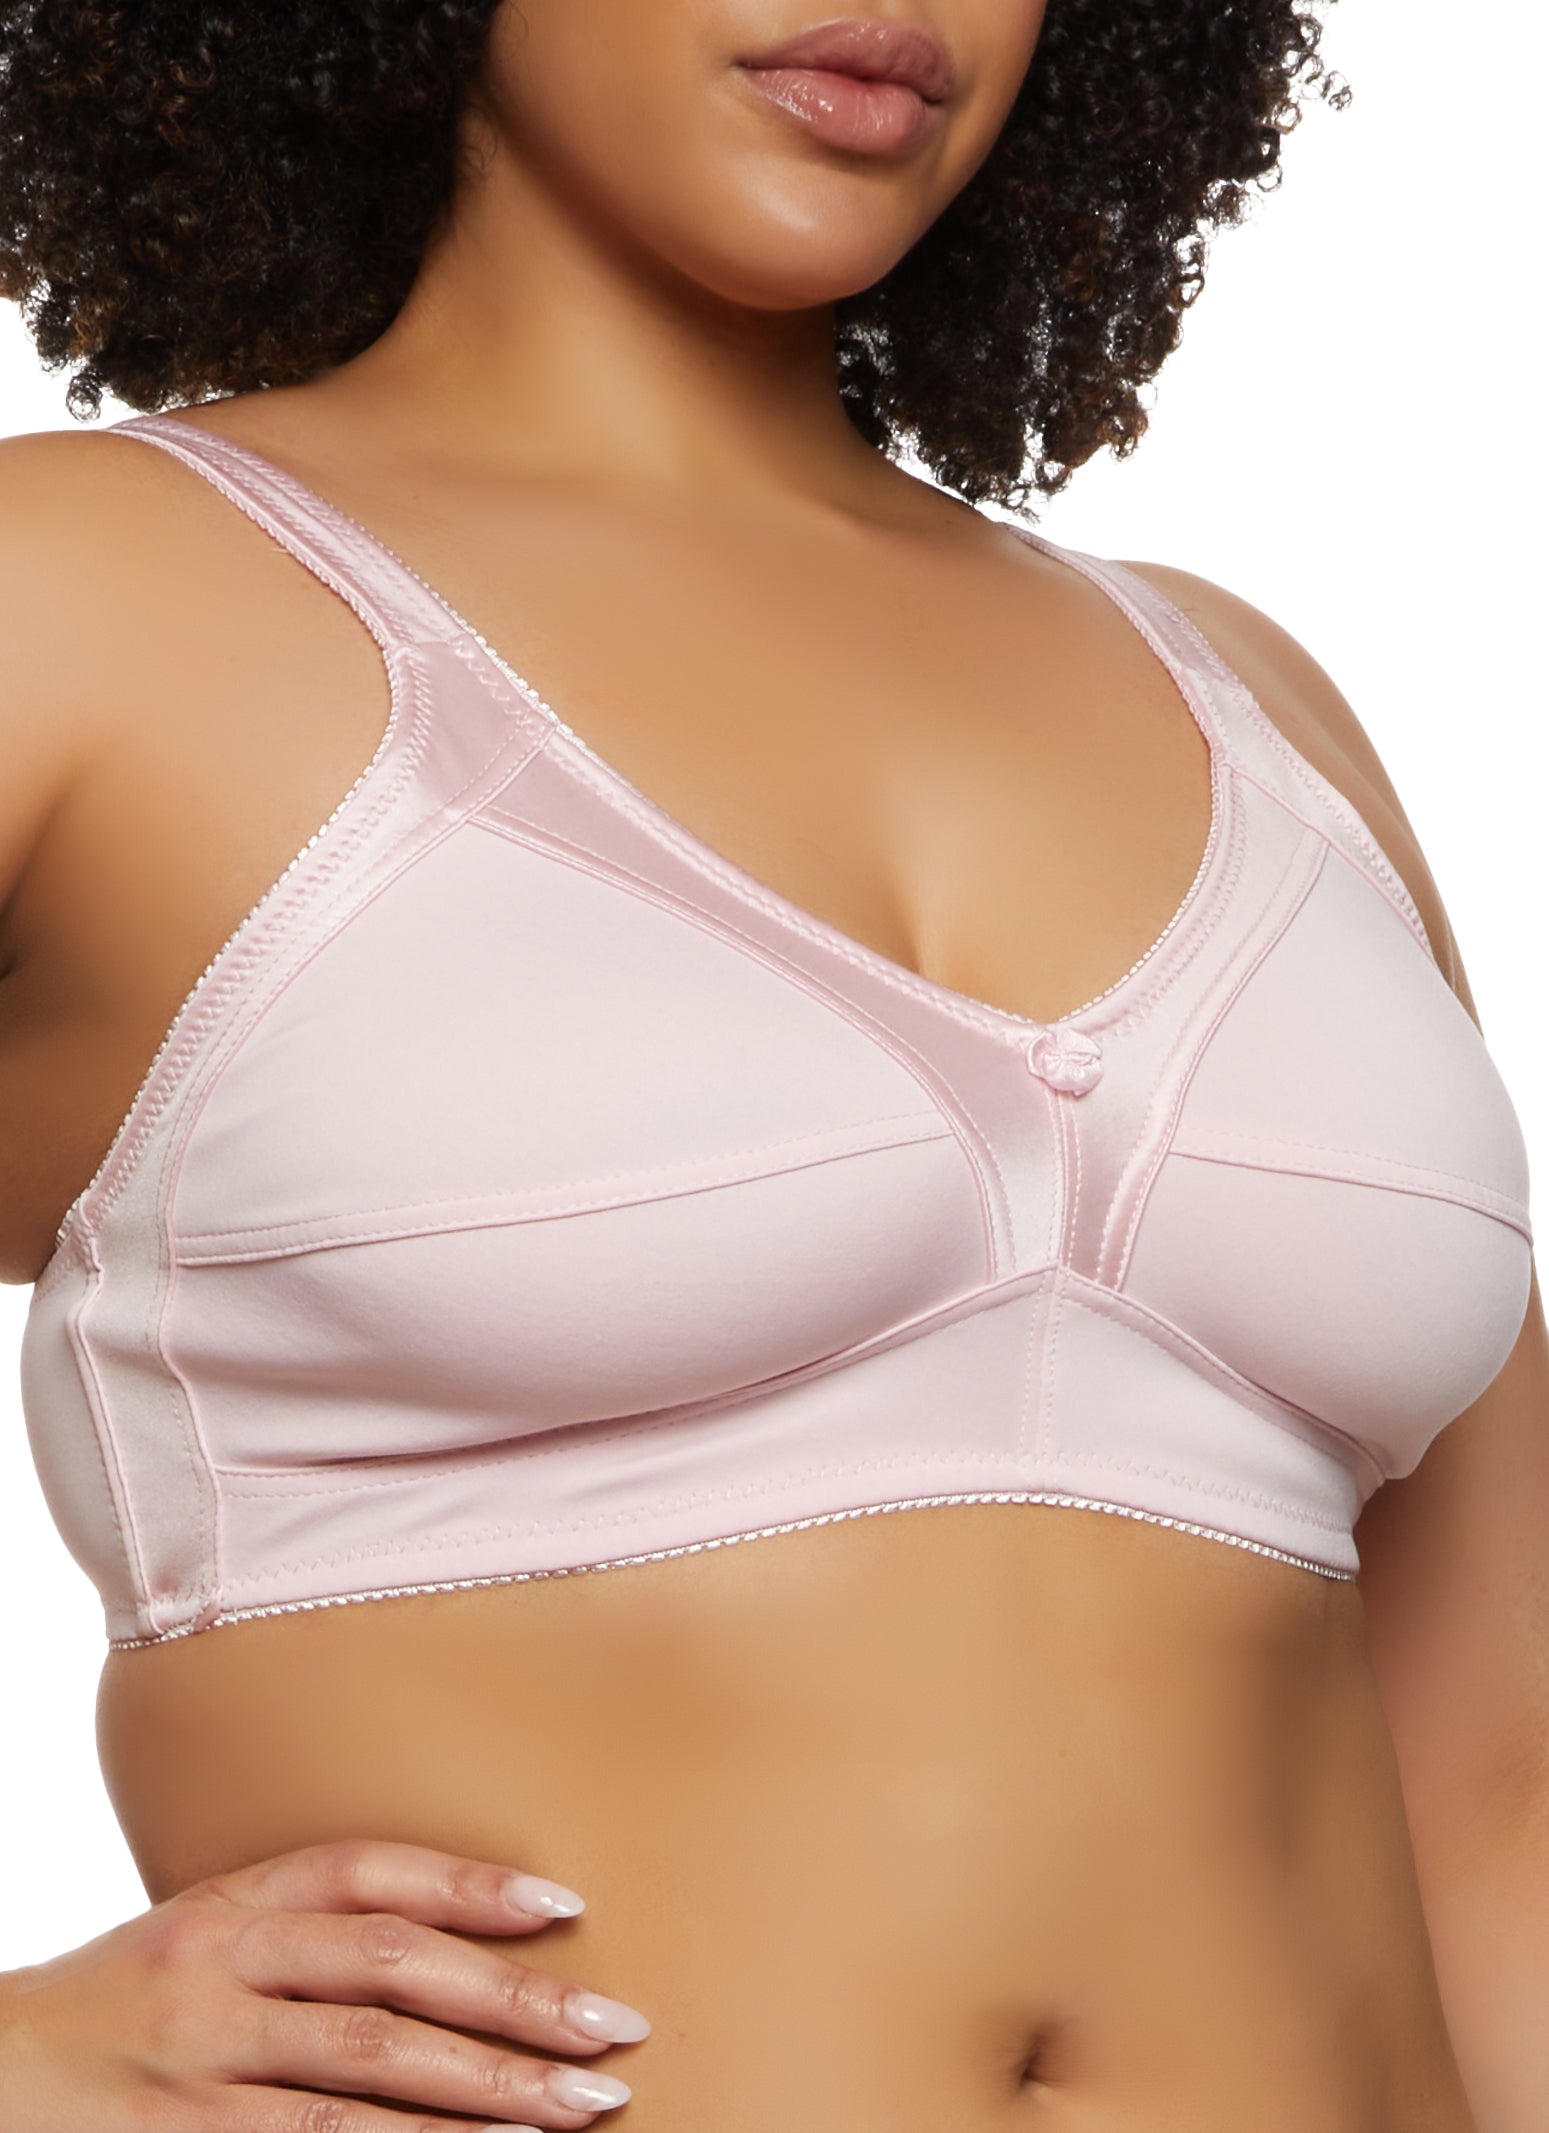 Plus Size Full Coverage Bras 2 Pack